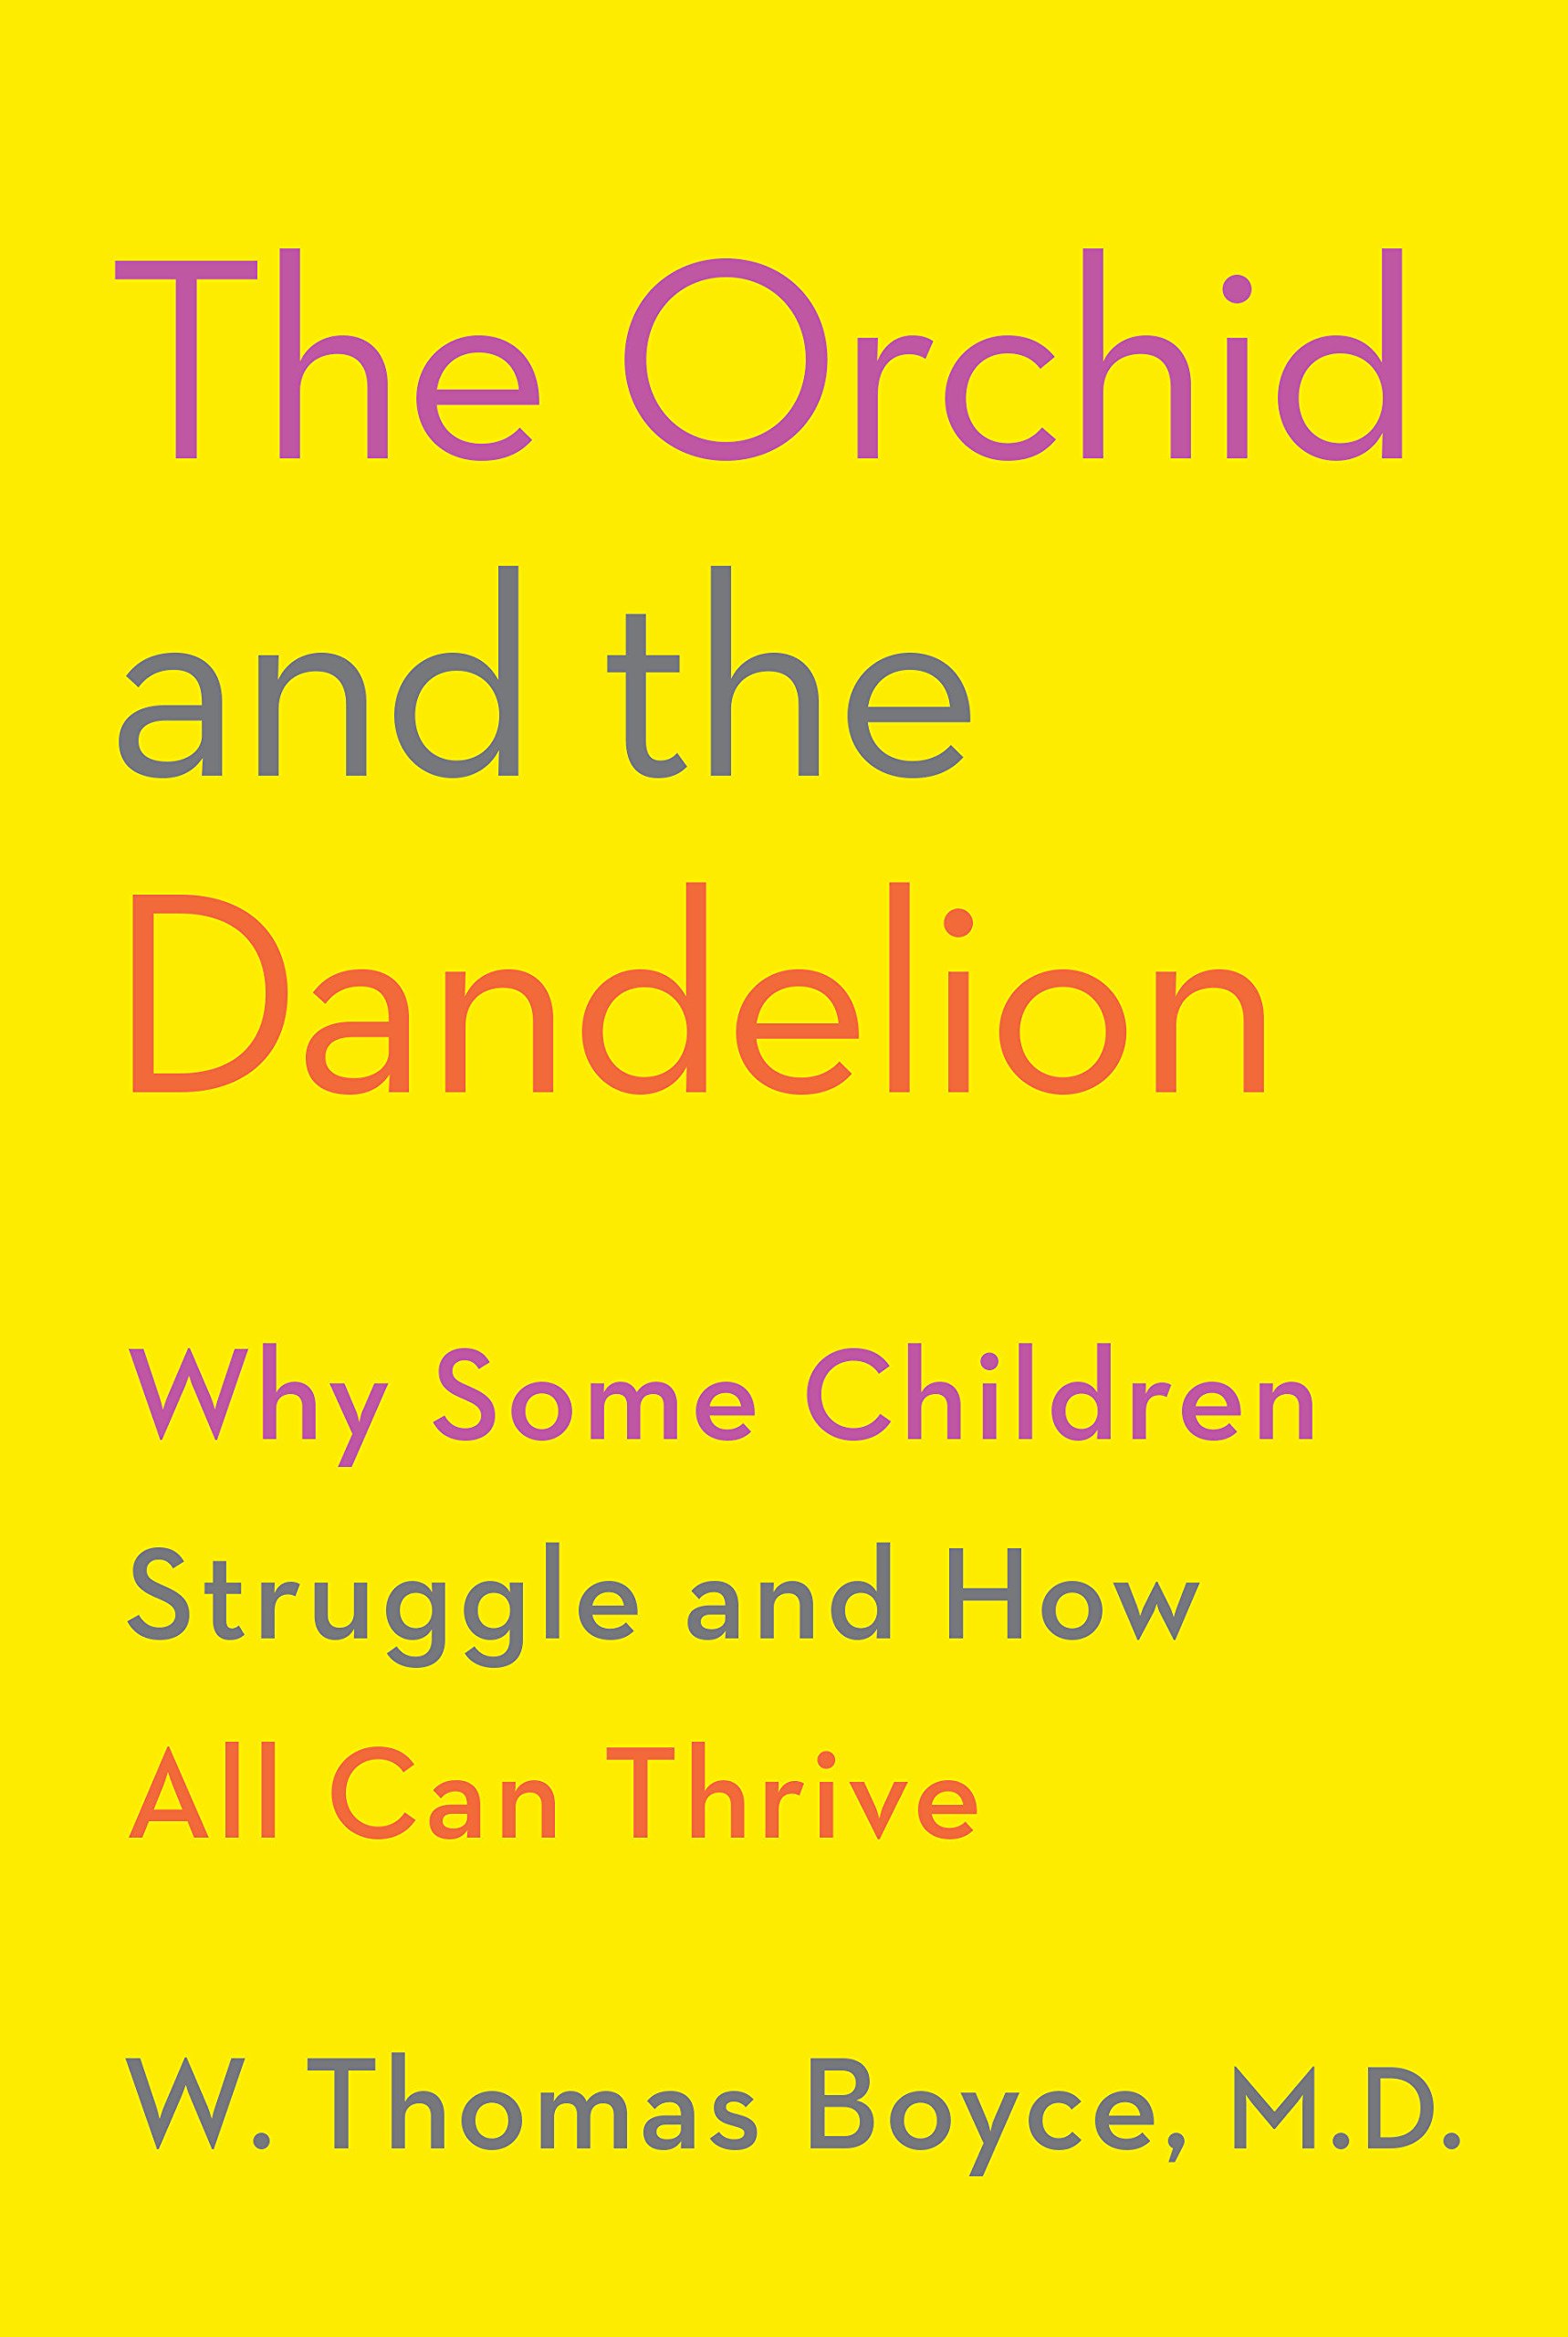 The Orchid And The Dandelion | W. Thomas Boyce